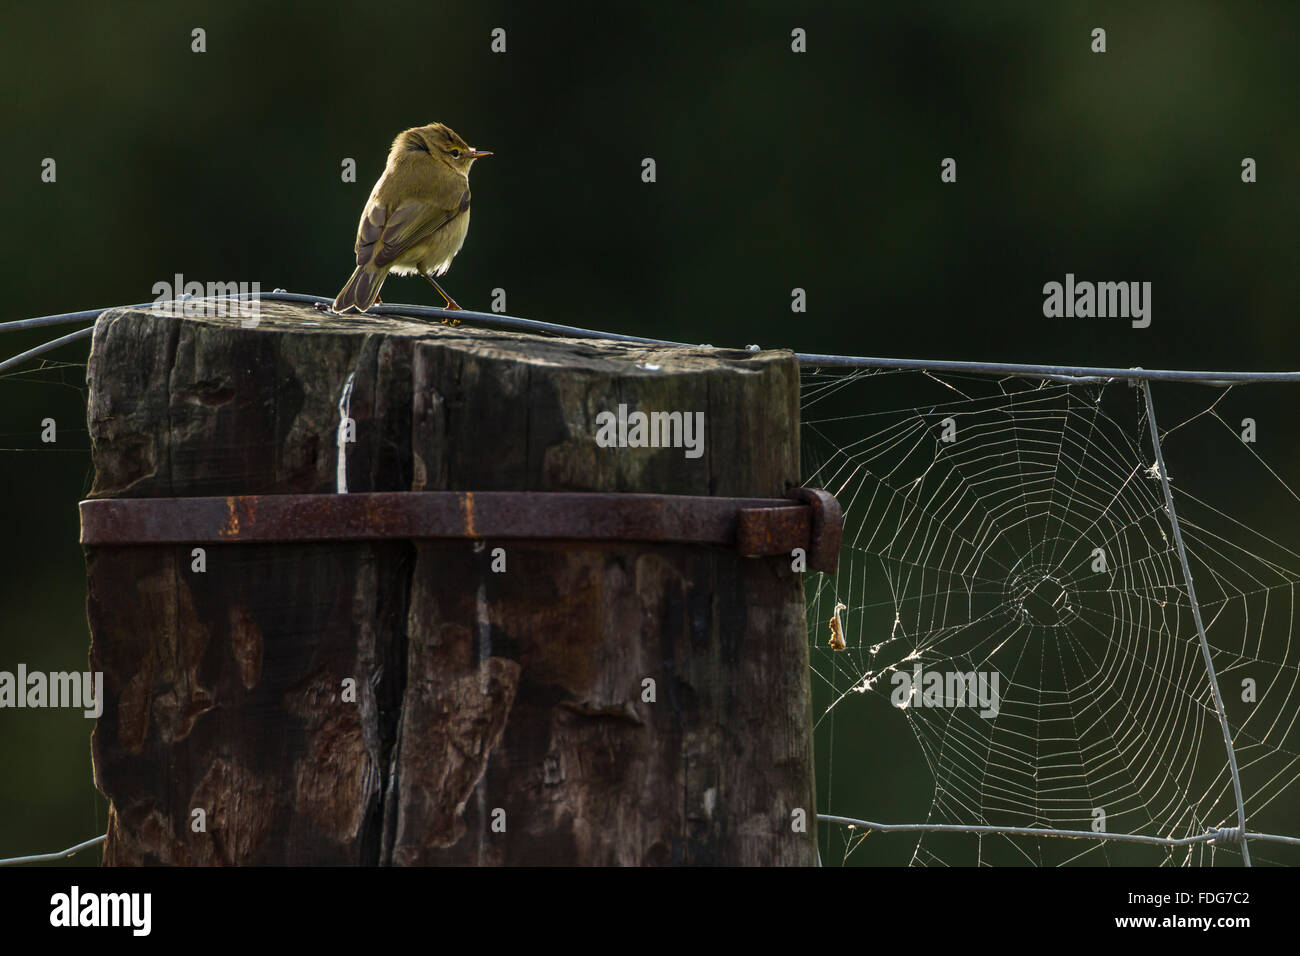 A Common Chiffchaff (Phylloscopus collybita) backlighting on a fence with a cobweb. Stock Photo